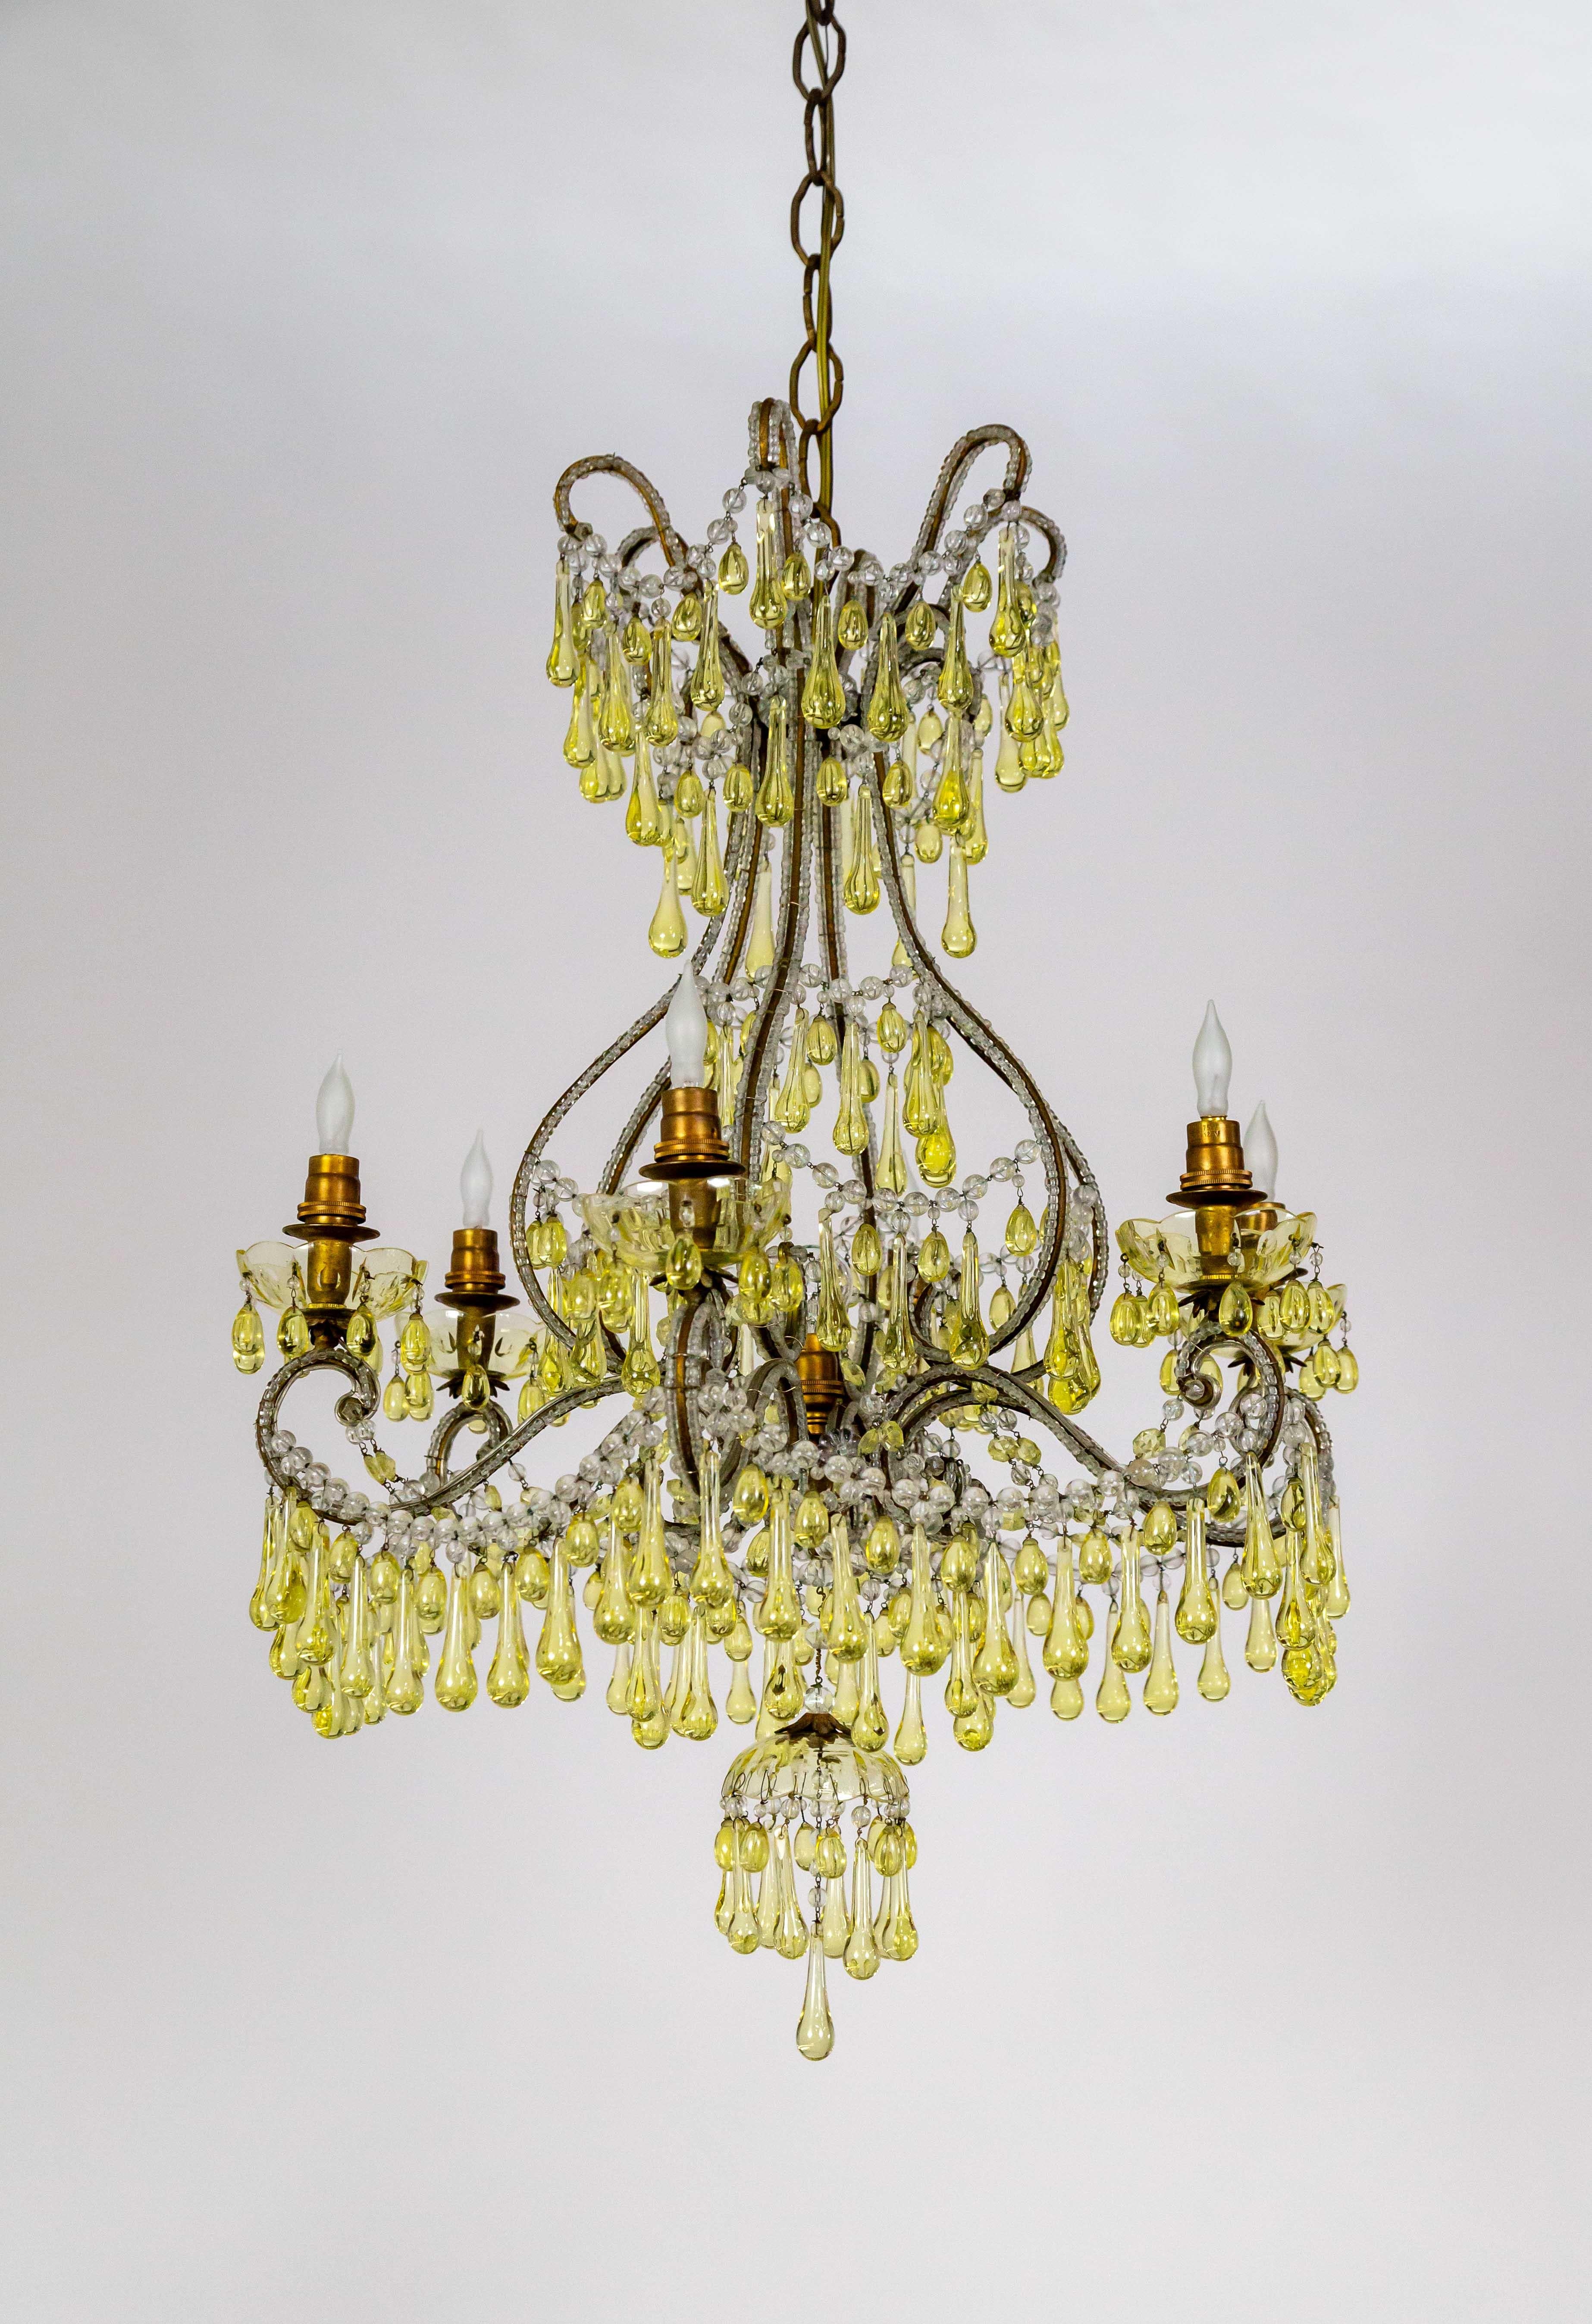 19th Century Rare Pale Yellow Crystal Drops Birdcage Chandelier For Sale 11